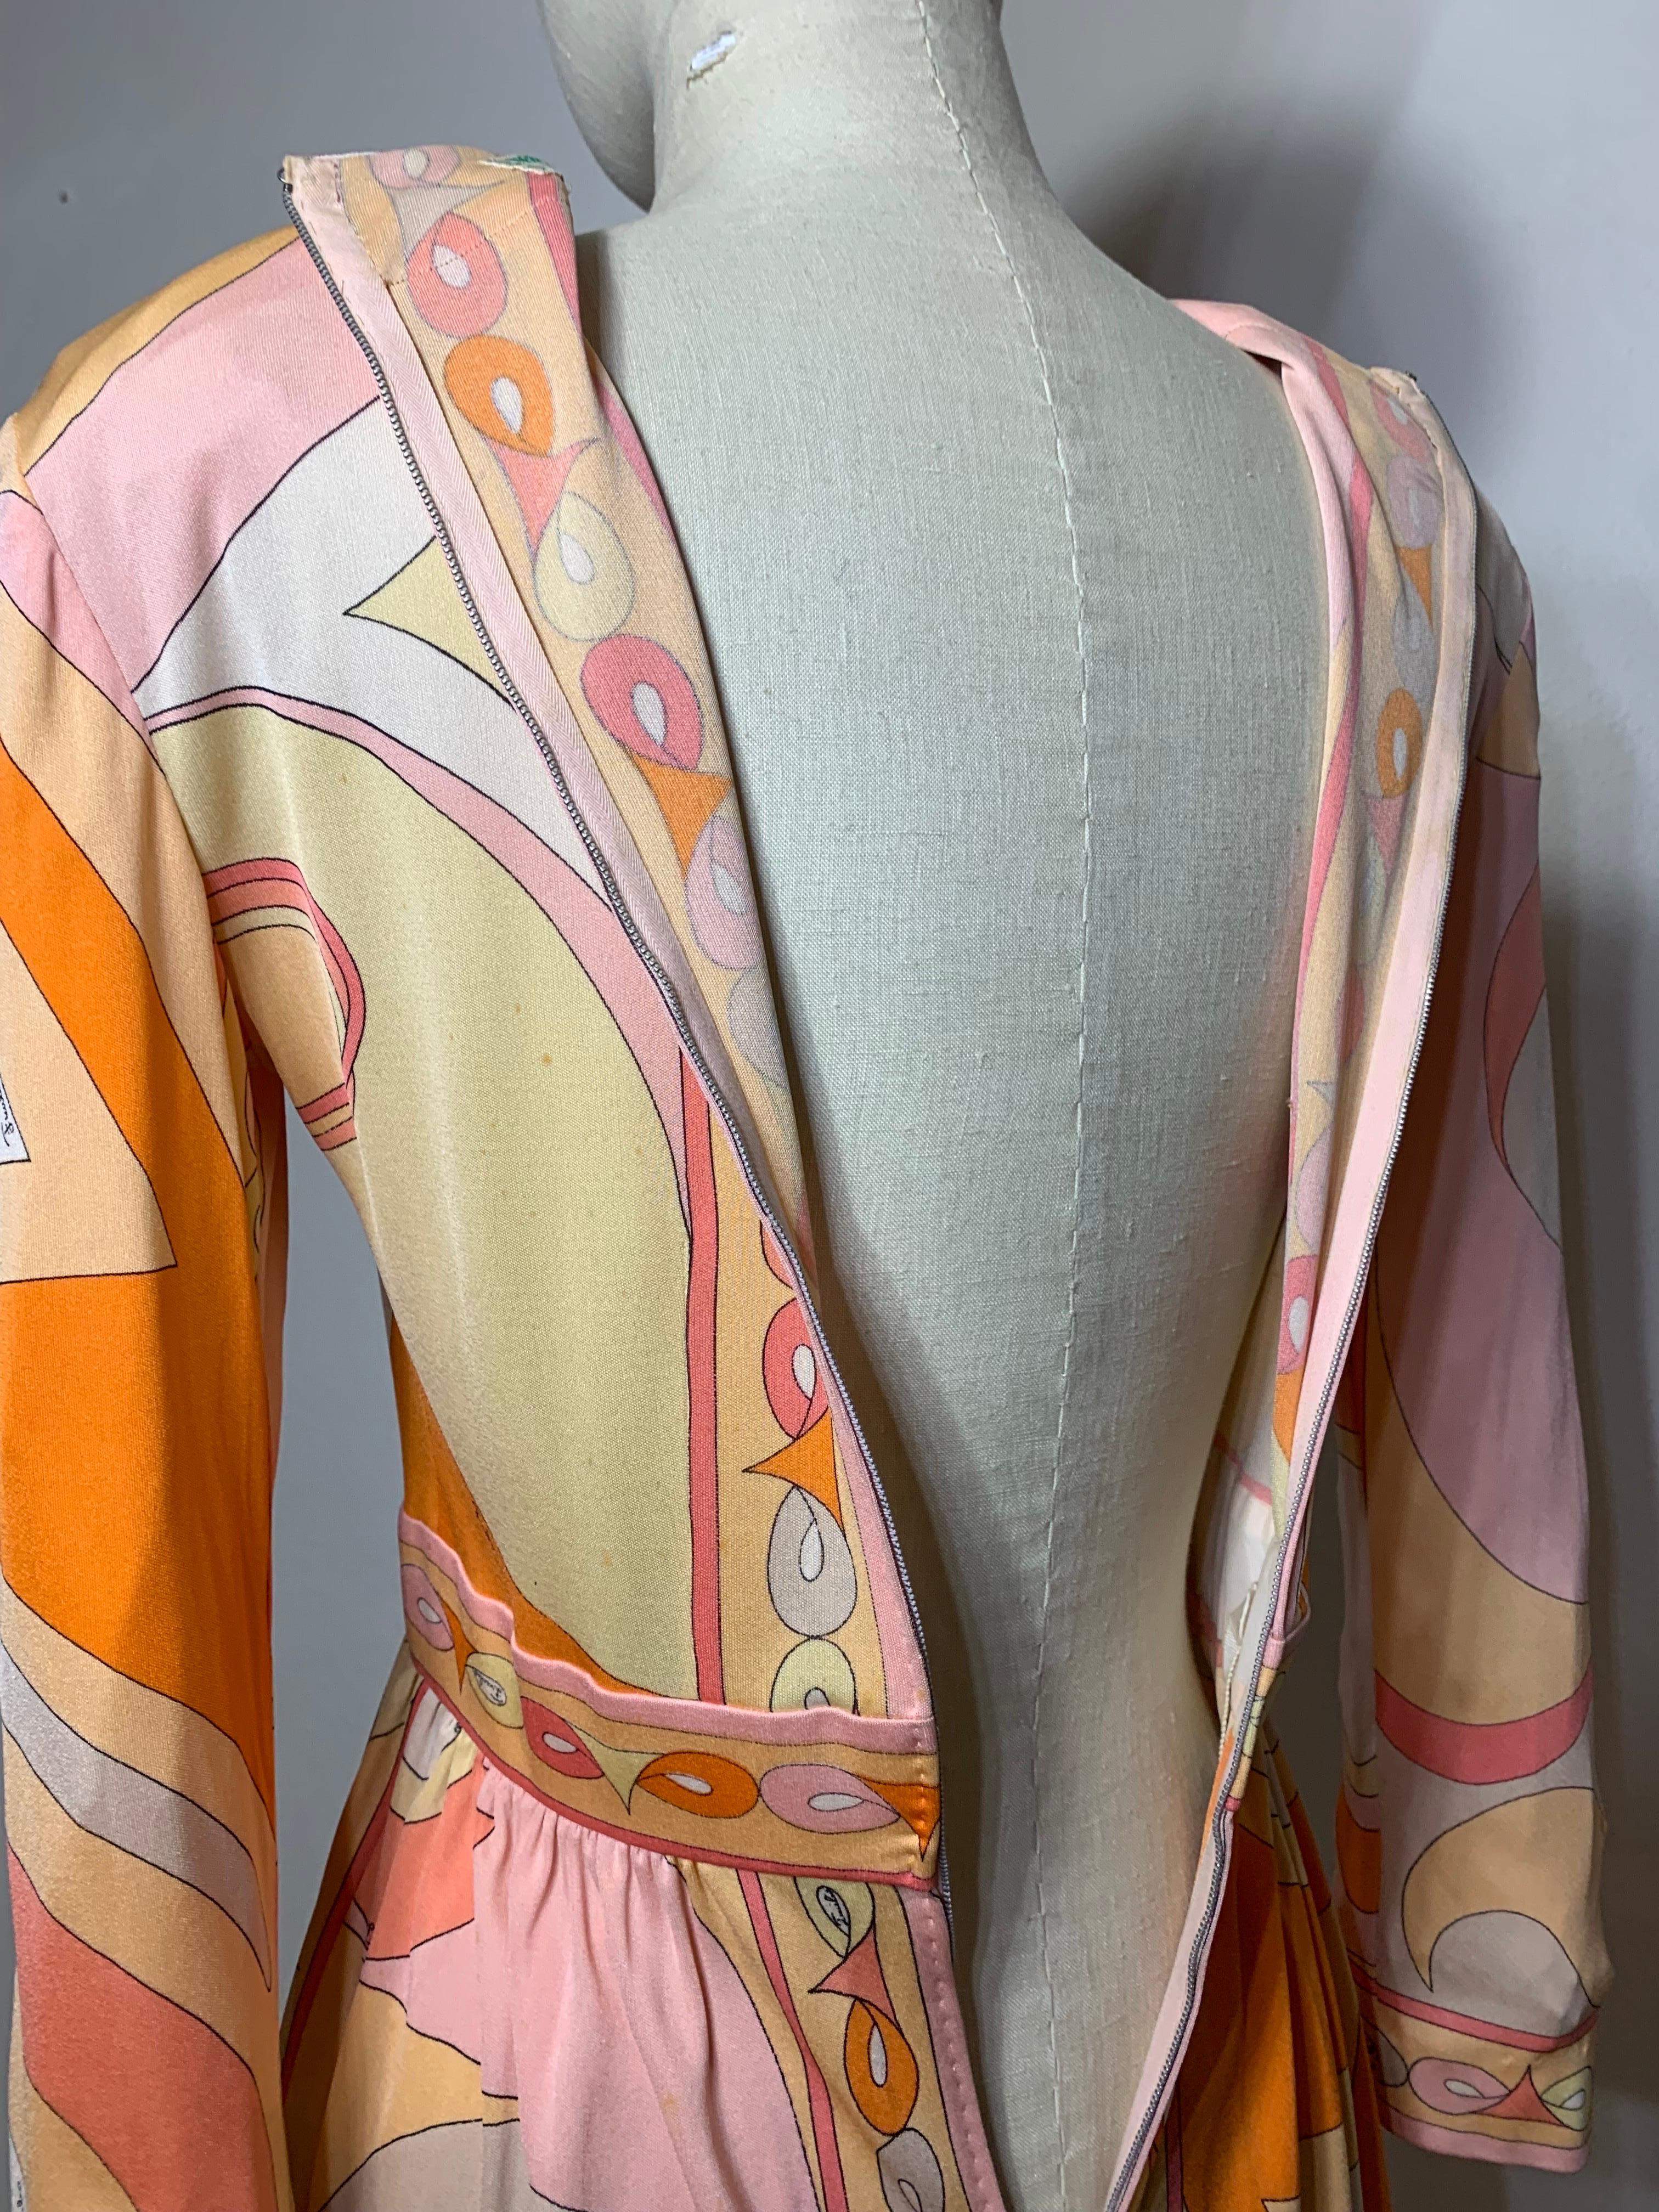 1960s Emilio Pucci Psychedelic Print Mod Day Dress w Full Skirt in Tangerine  For Sale 14